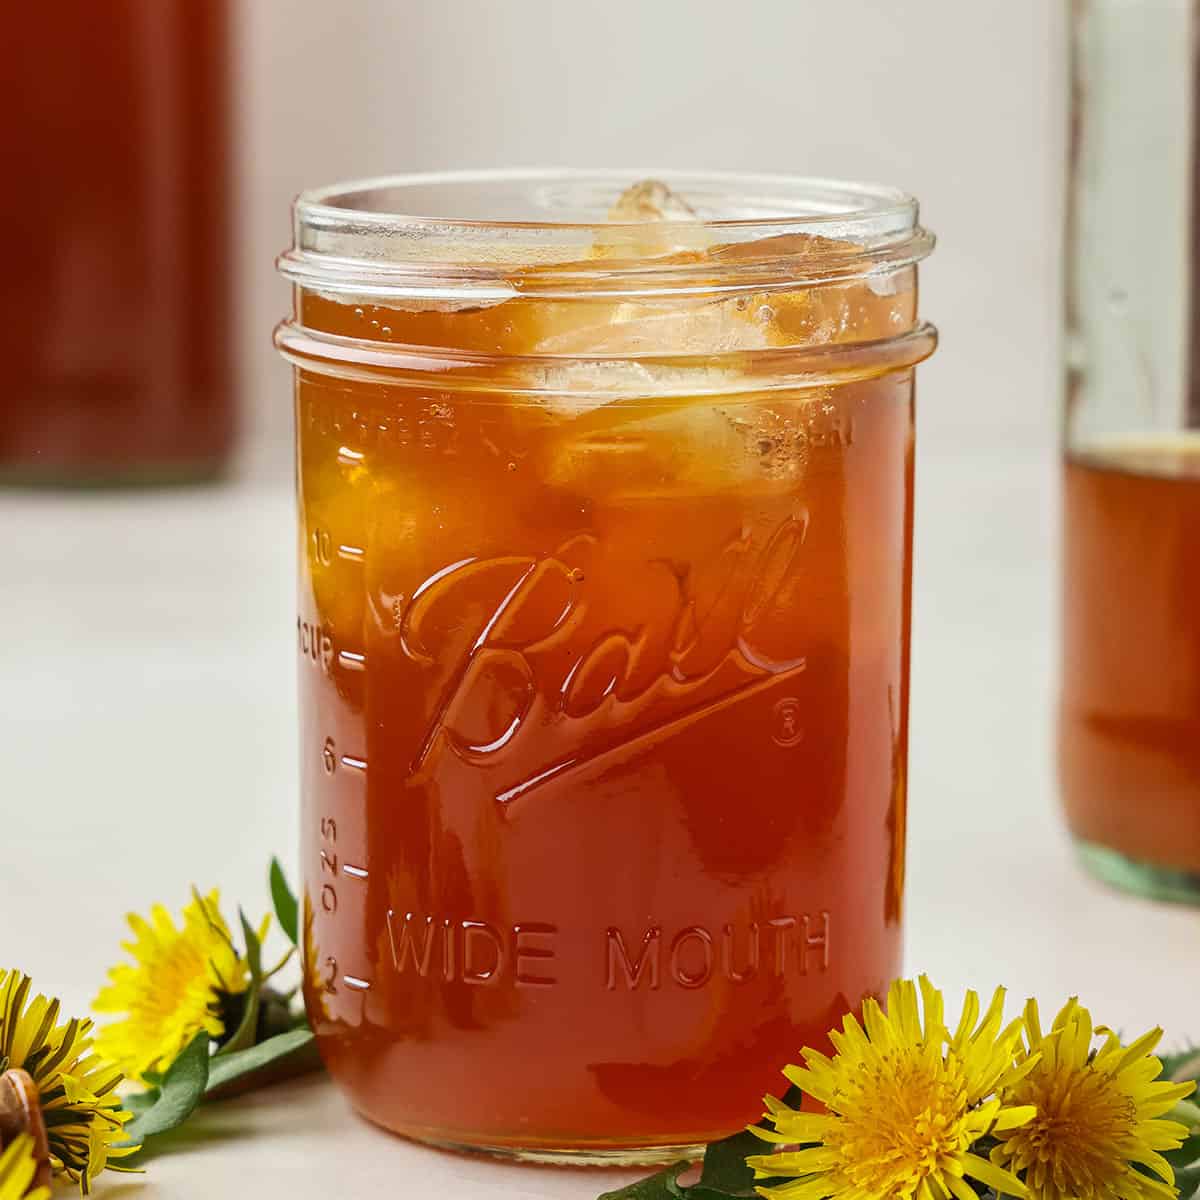 A glass jar of dandelion kombucha with ice, surrounded by fresh dandelion flowers.